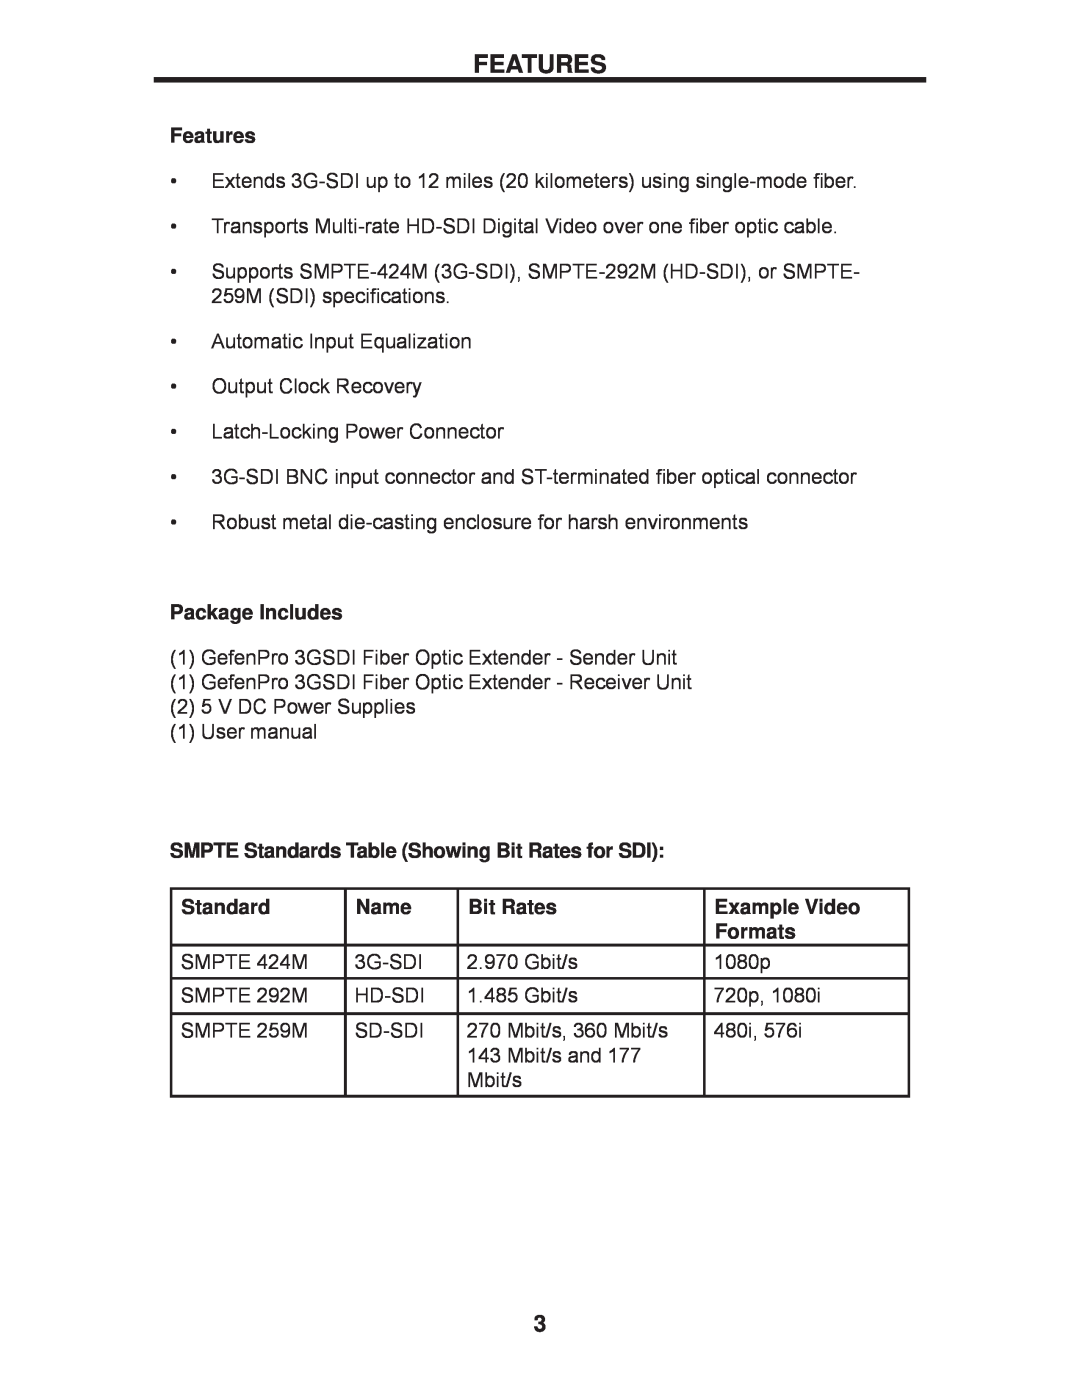 Gefen GEF-3GSDI-FO-141 Features, Package Includes, SMPTE Standards Table Showing Bit Rates for SDI, Name, Example Video 